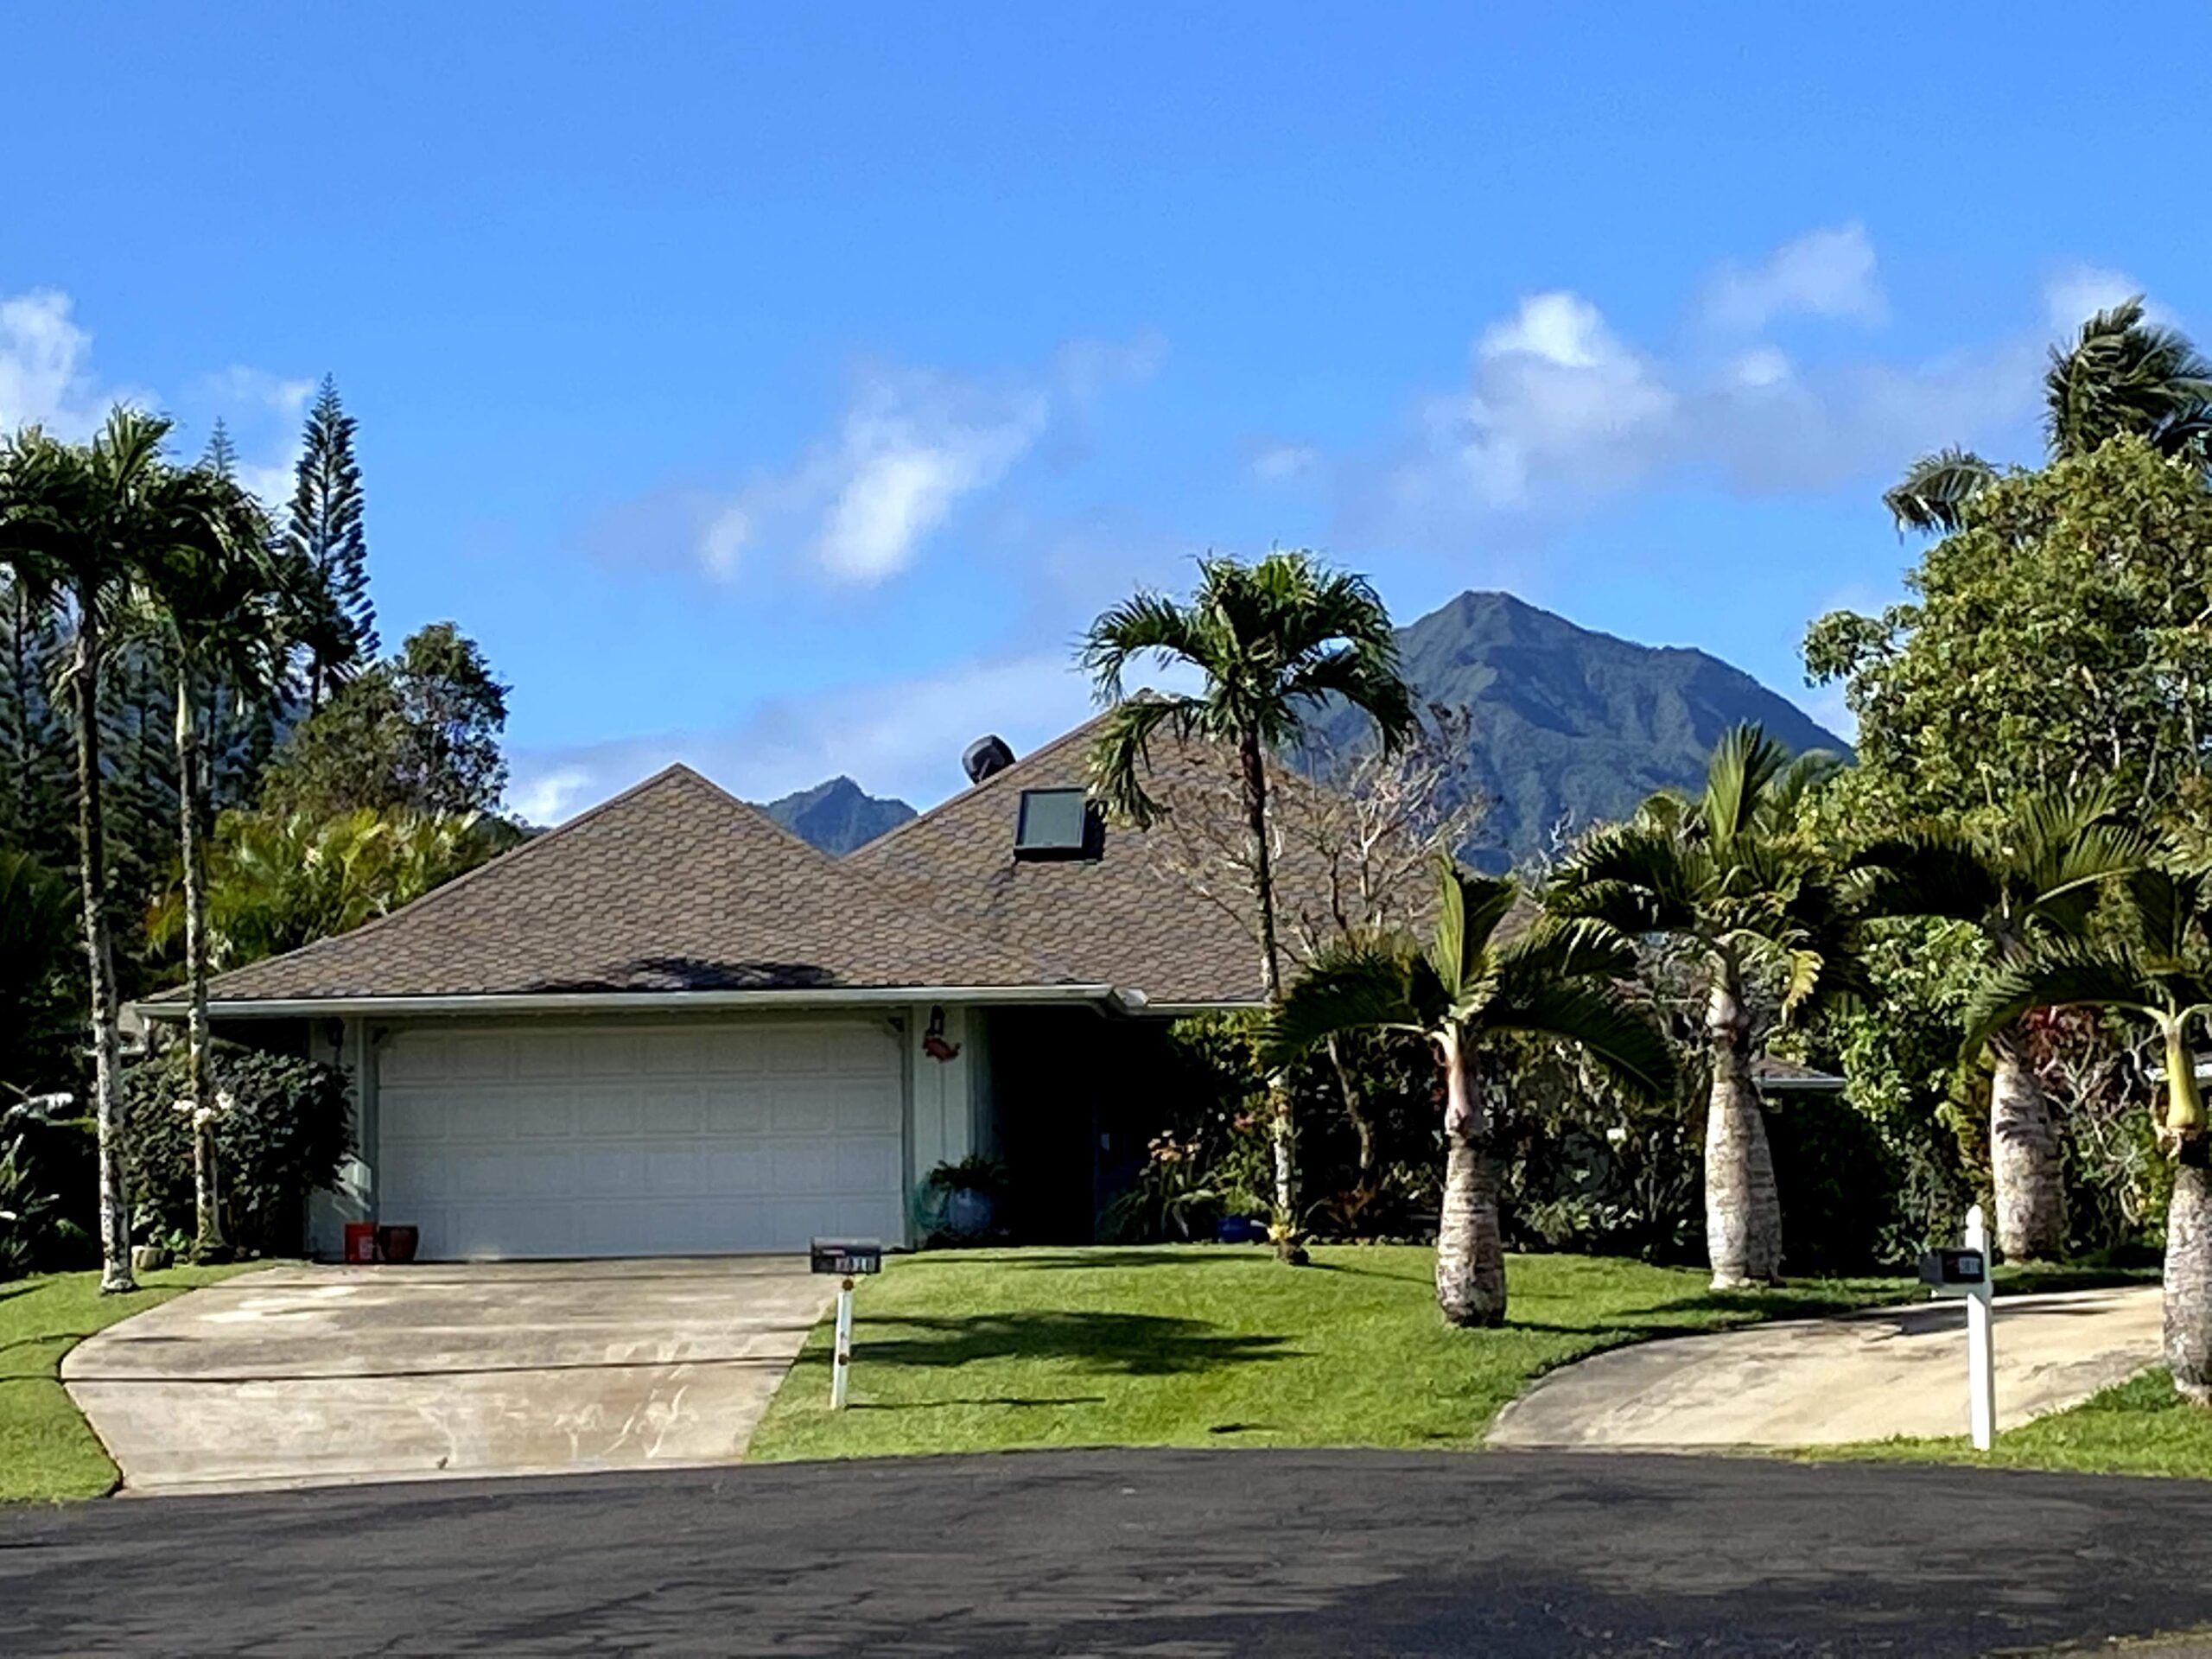 Front view of our Kauai Vacation rental home